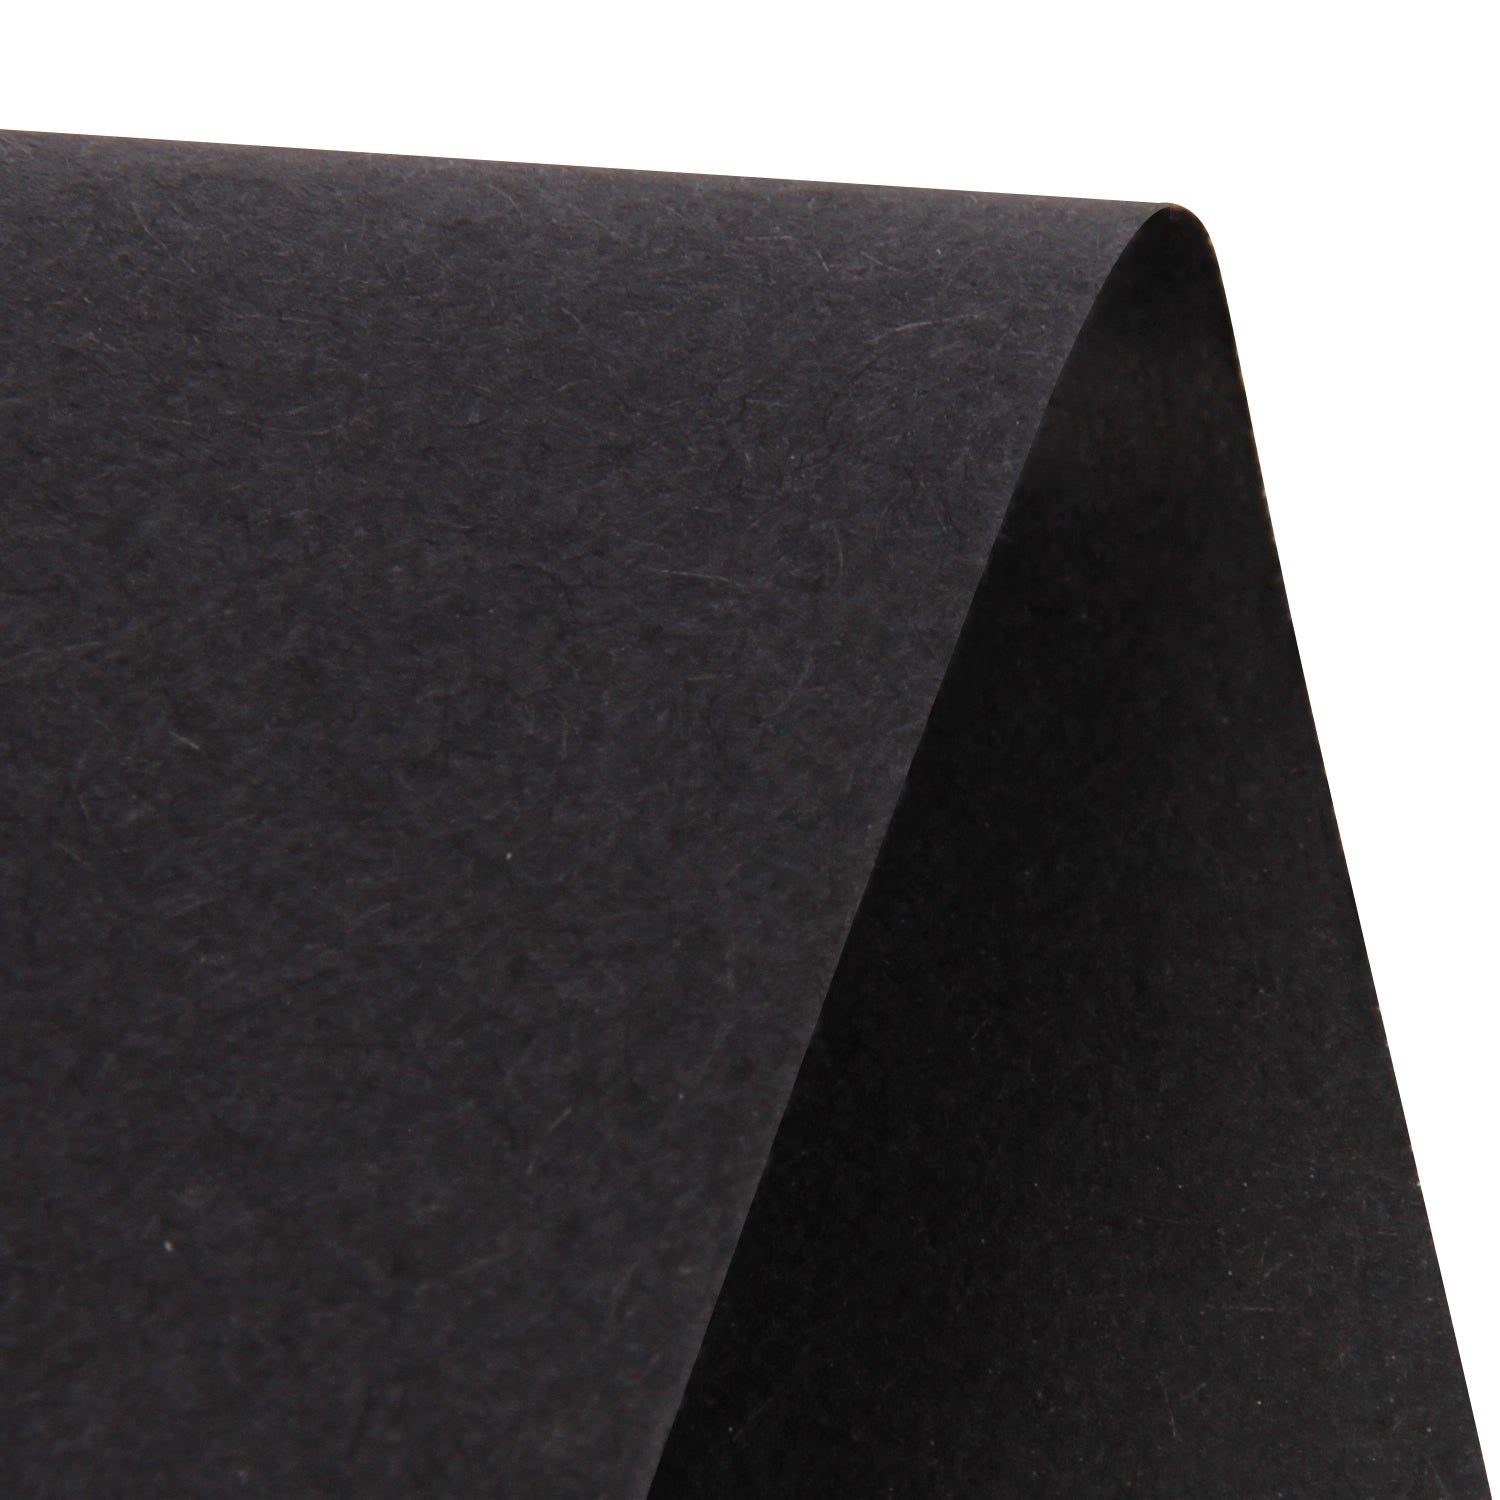  RUSPEPA Black Kraft Paper Roll - 36 inches x 100 feet -  Recyclable Paper Perfect for Wrapping, Craft, Packing, Floor Covering,  Dunnage, Parcel, Table Runner : Health & Household